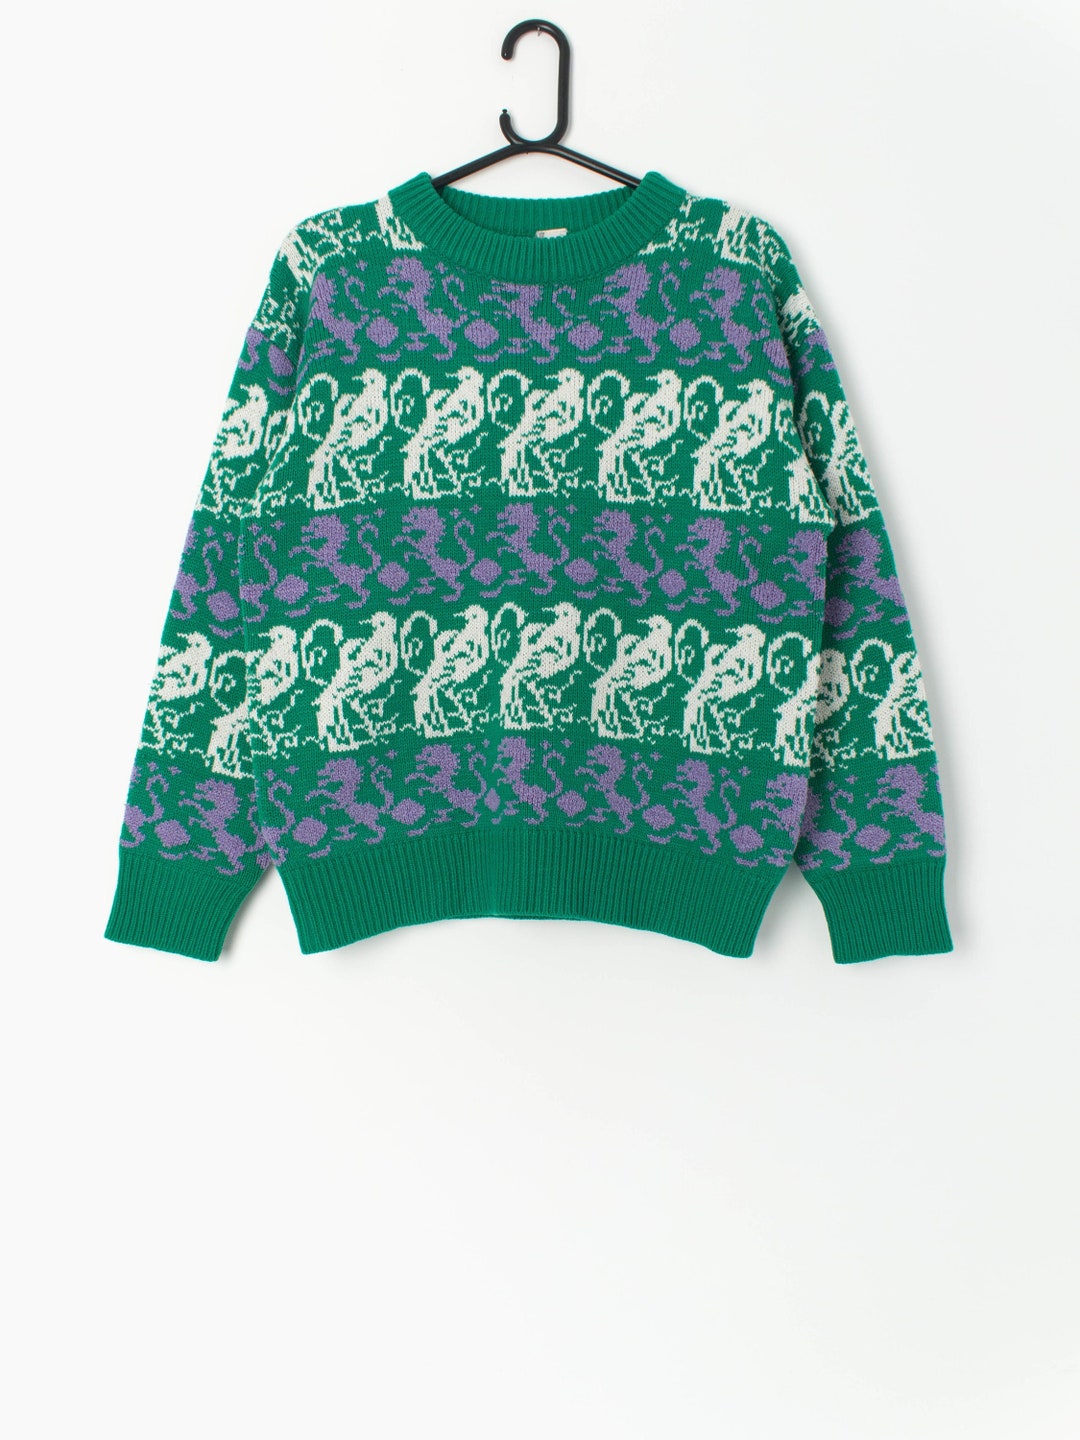 80s Green Sweater With Dragon and Bird Repeating Pattern - Etsy